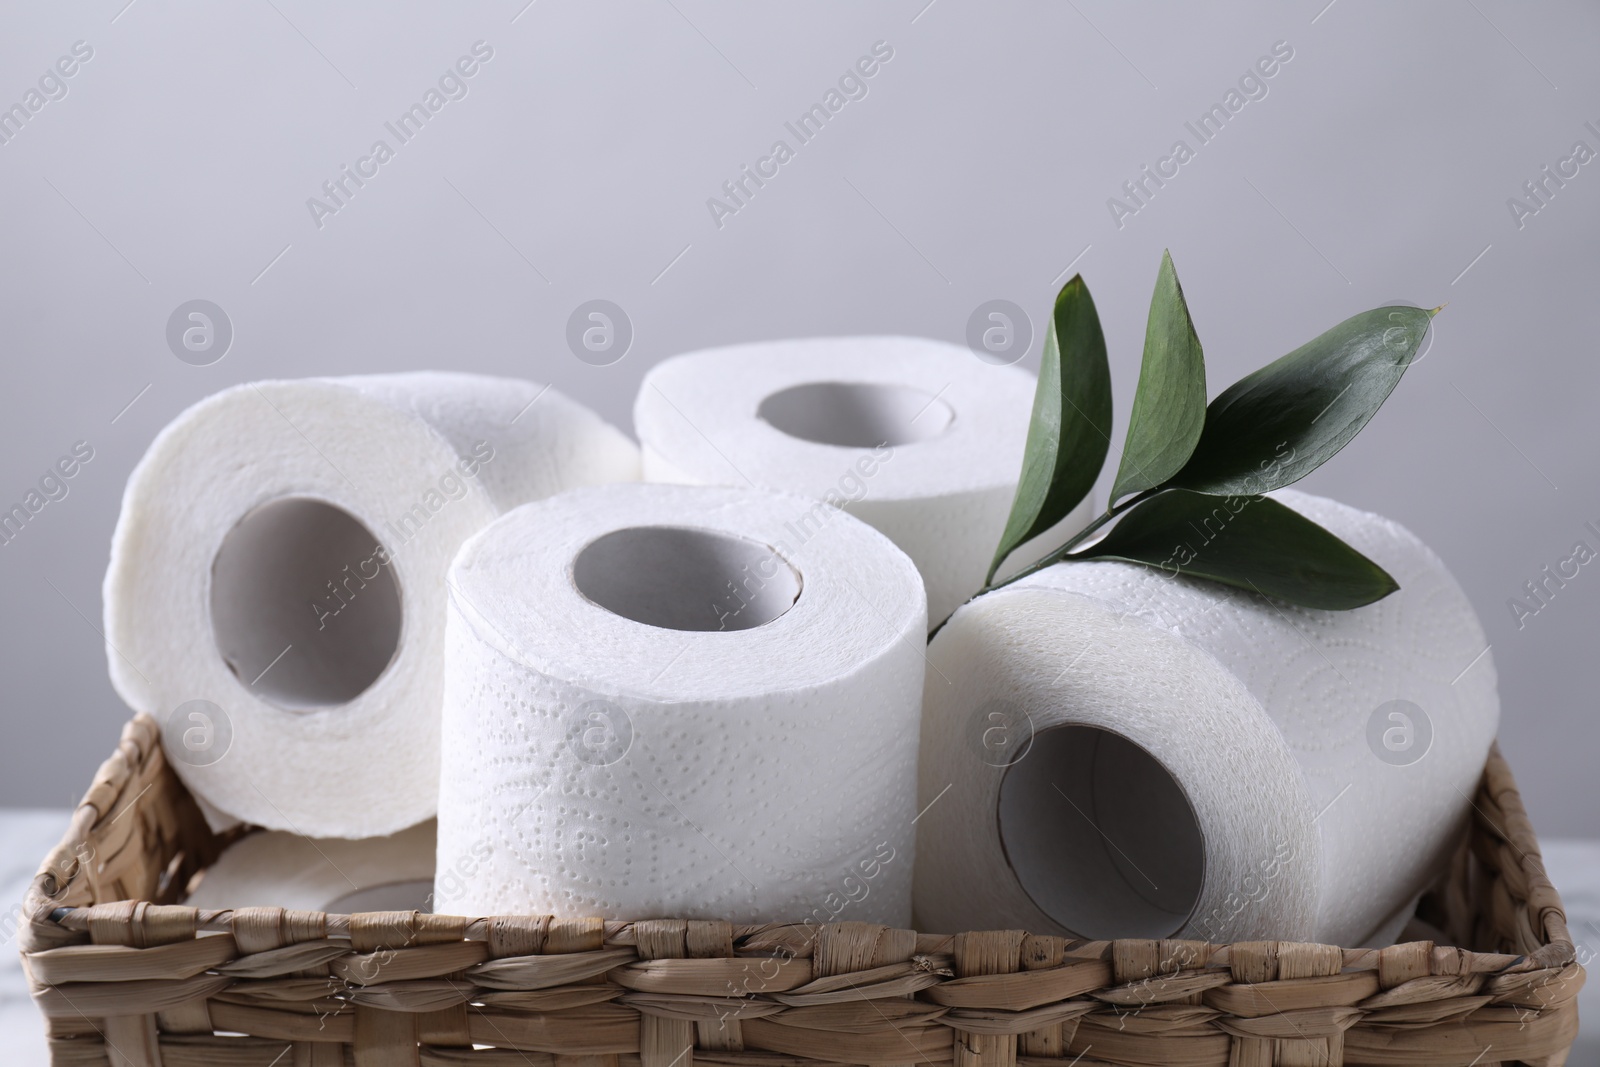 Photo of Toilet paper rolls and green leaves in wicker basket against light grey wall